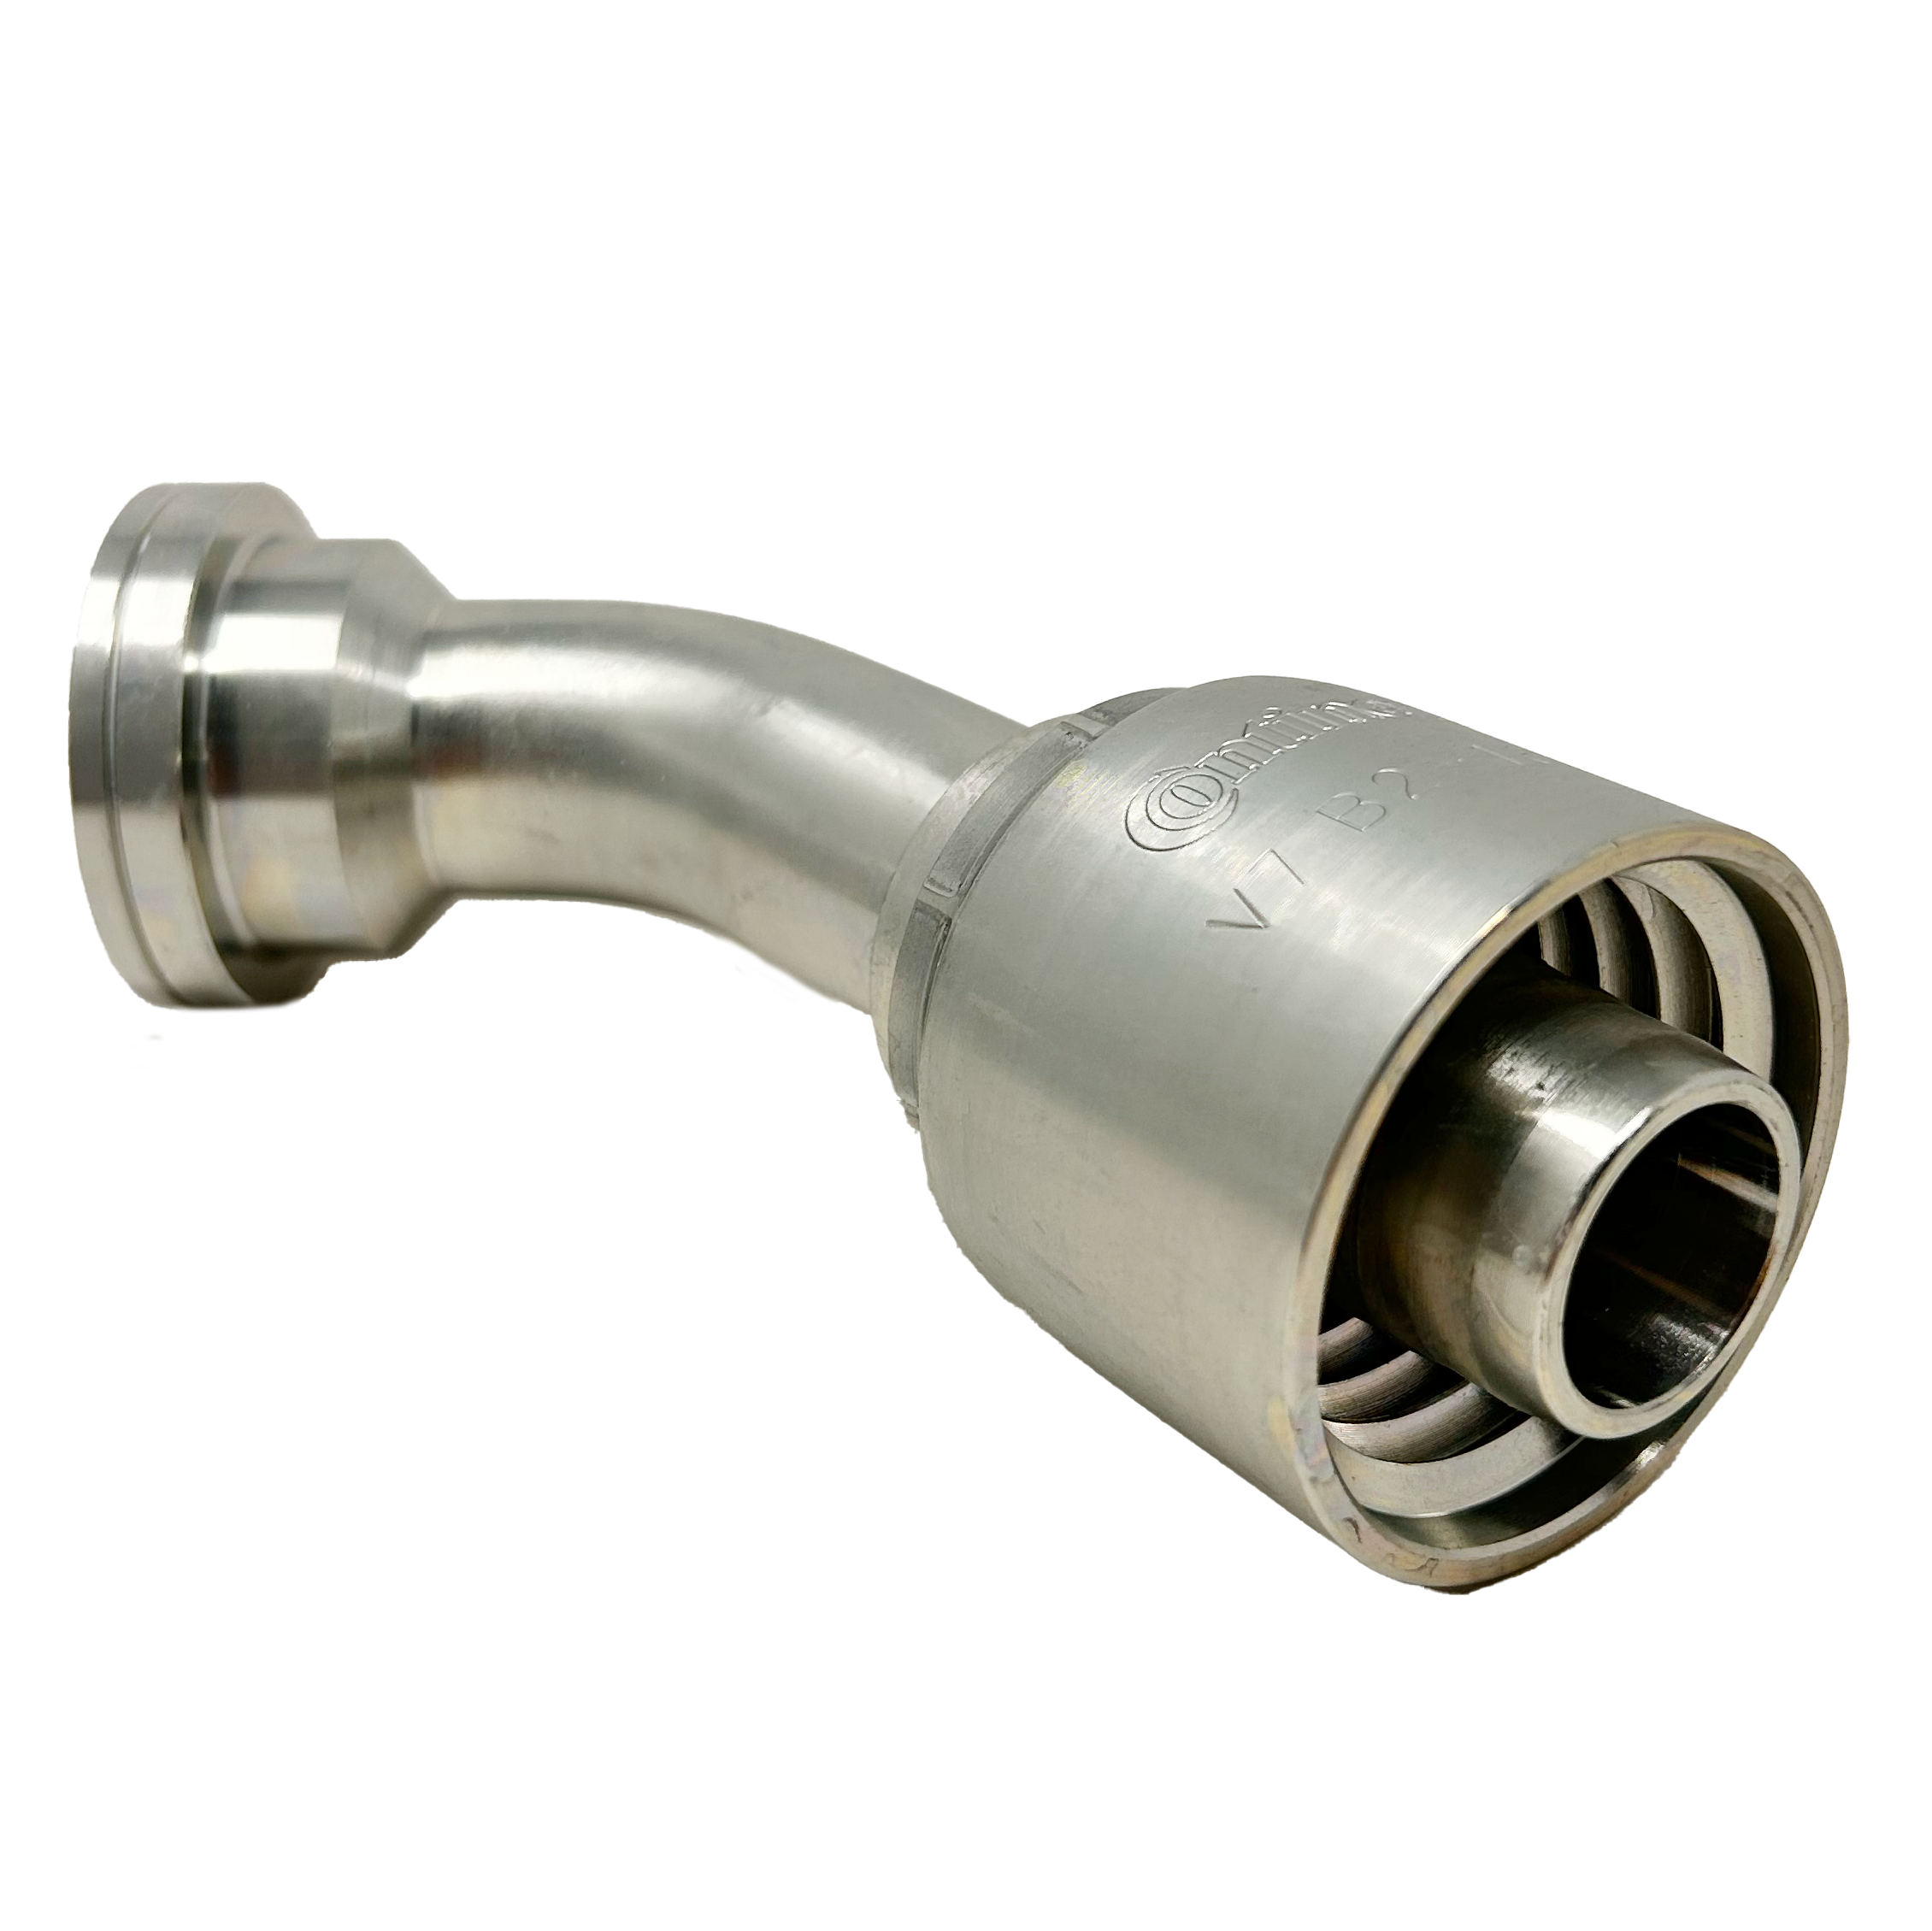 B2-FH45-3232: Continental Hose Fitting, 2" Hose ID x 2" Code 62, 45-Degree Connection